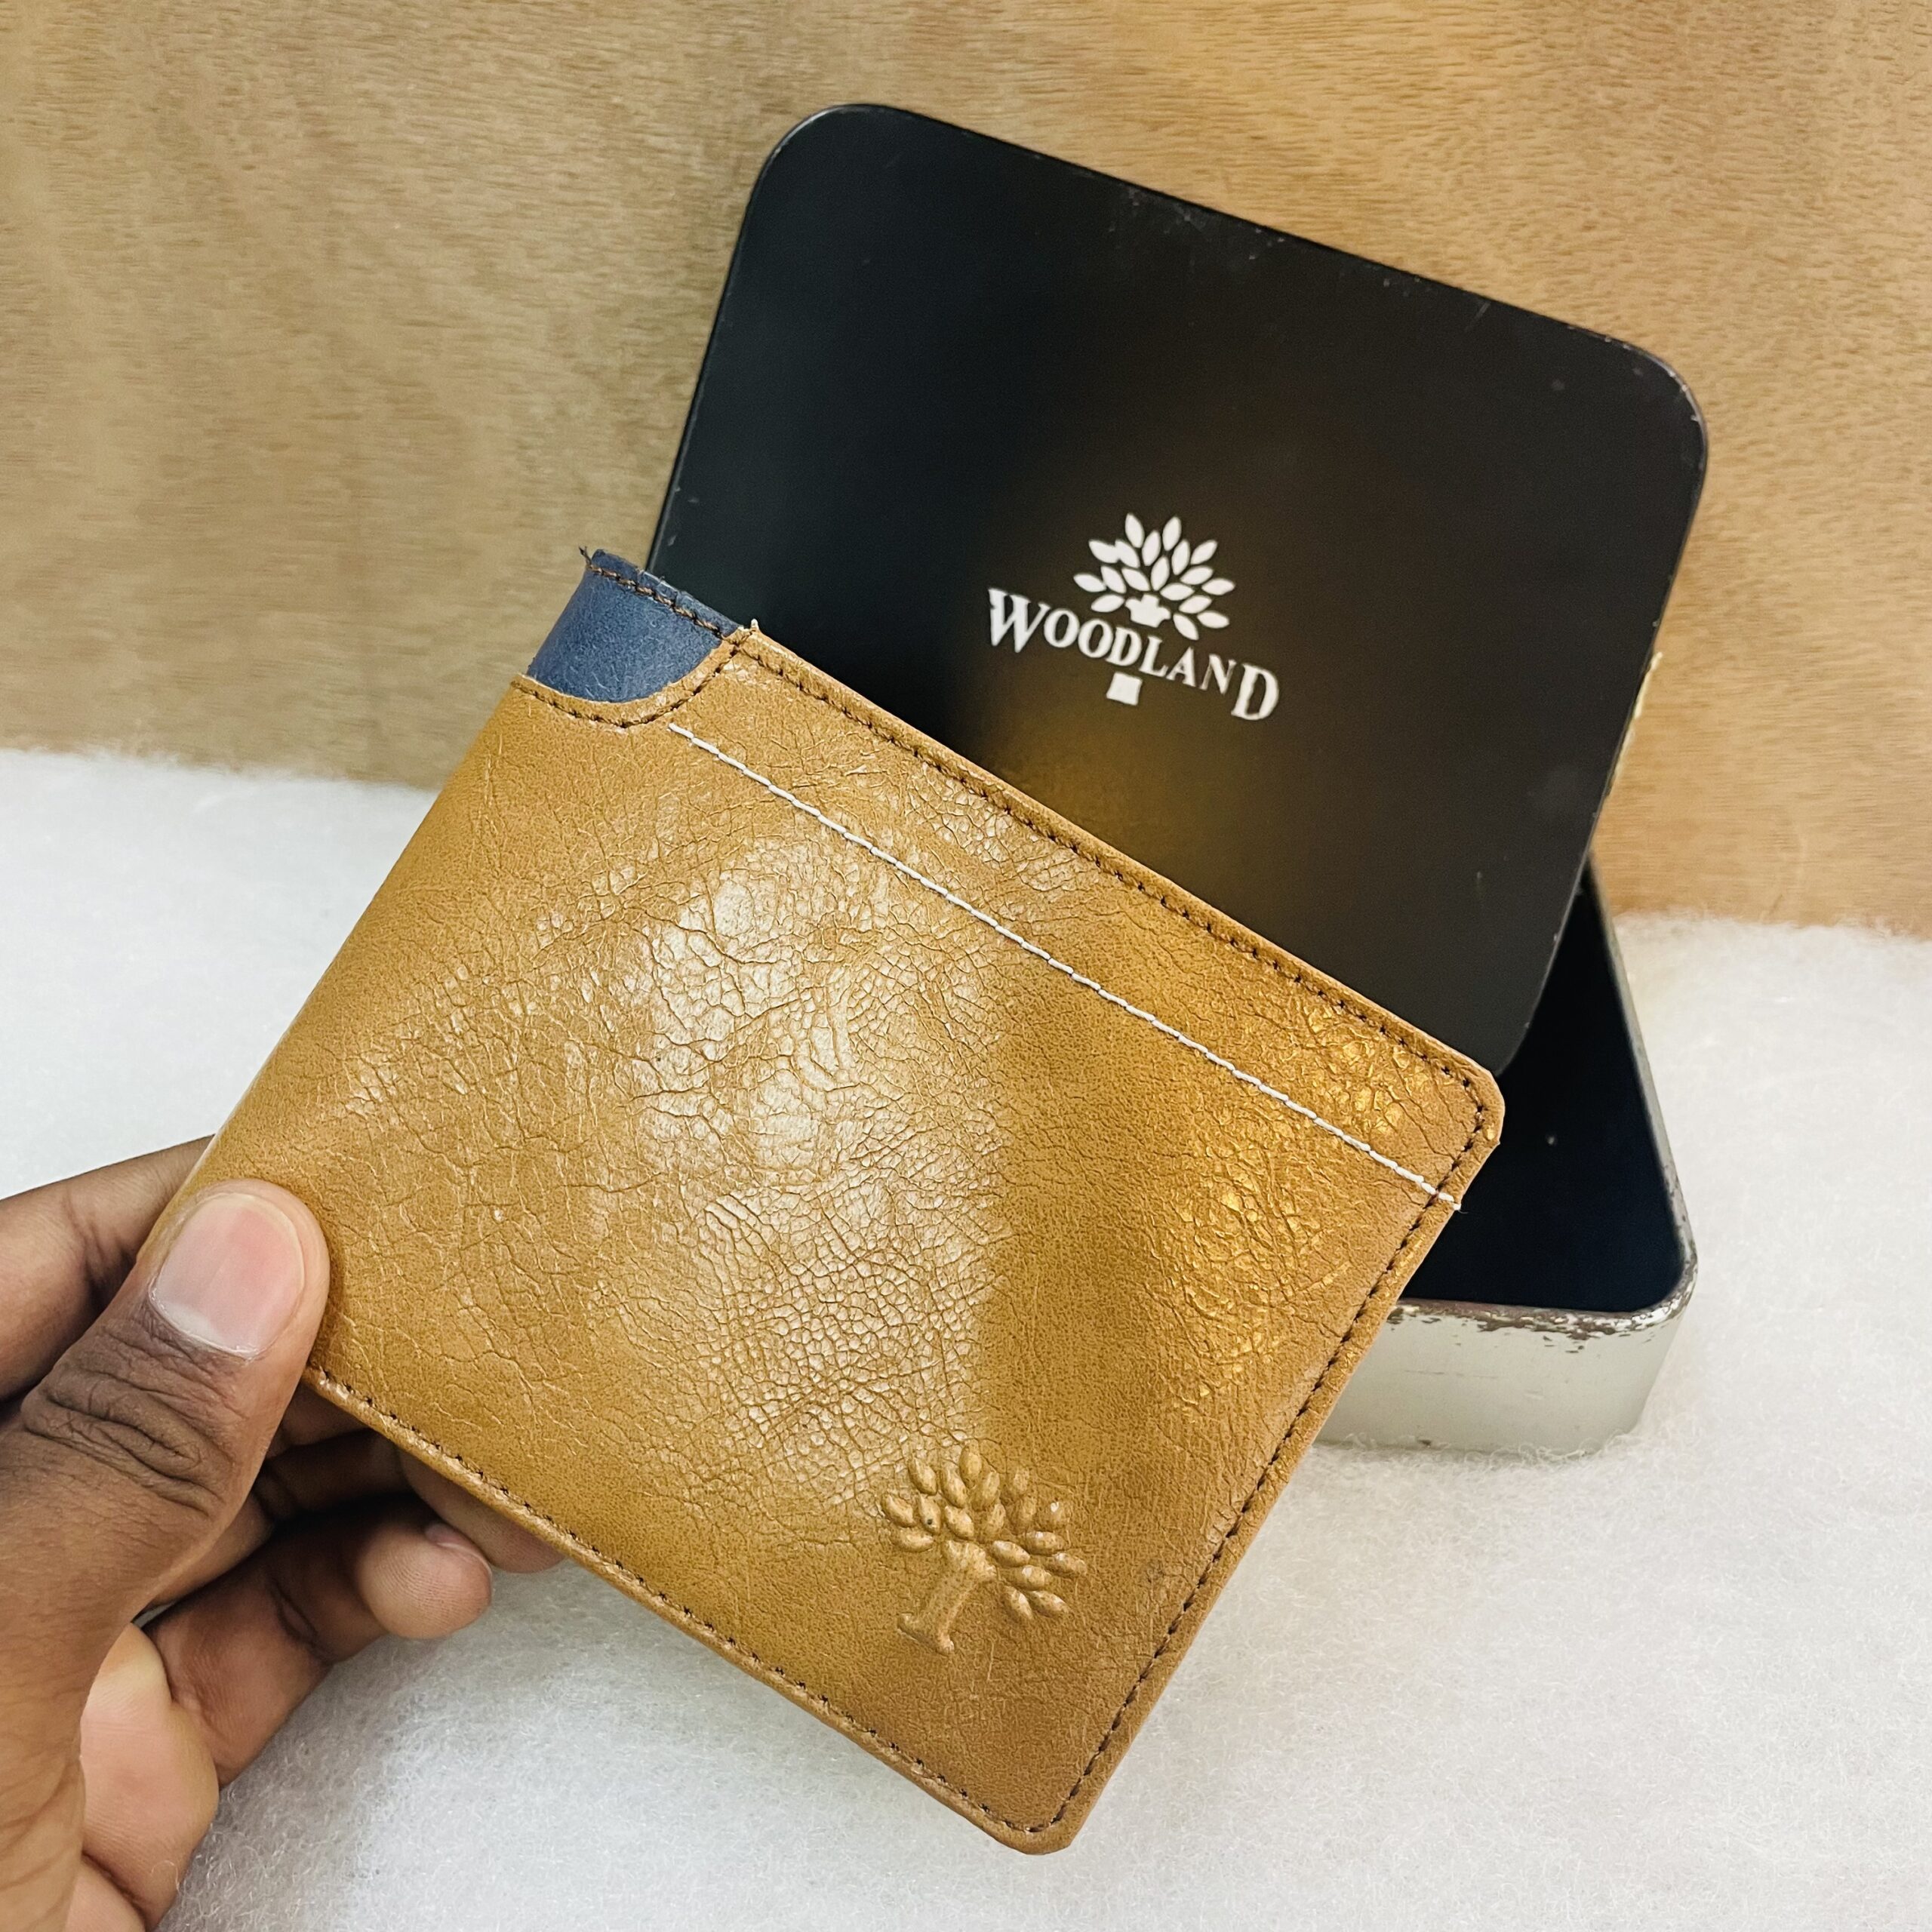 Woodland Leather Wallet | Best Leather Wallet In Budget | Amazon Wallet |  Review In Hindi 🔥🔥 - YouTube